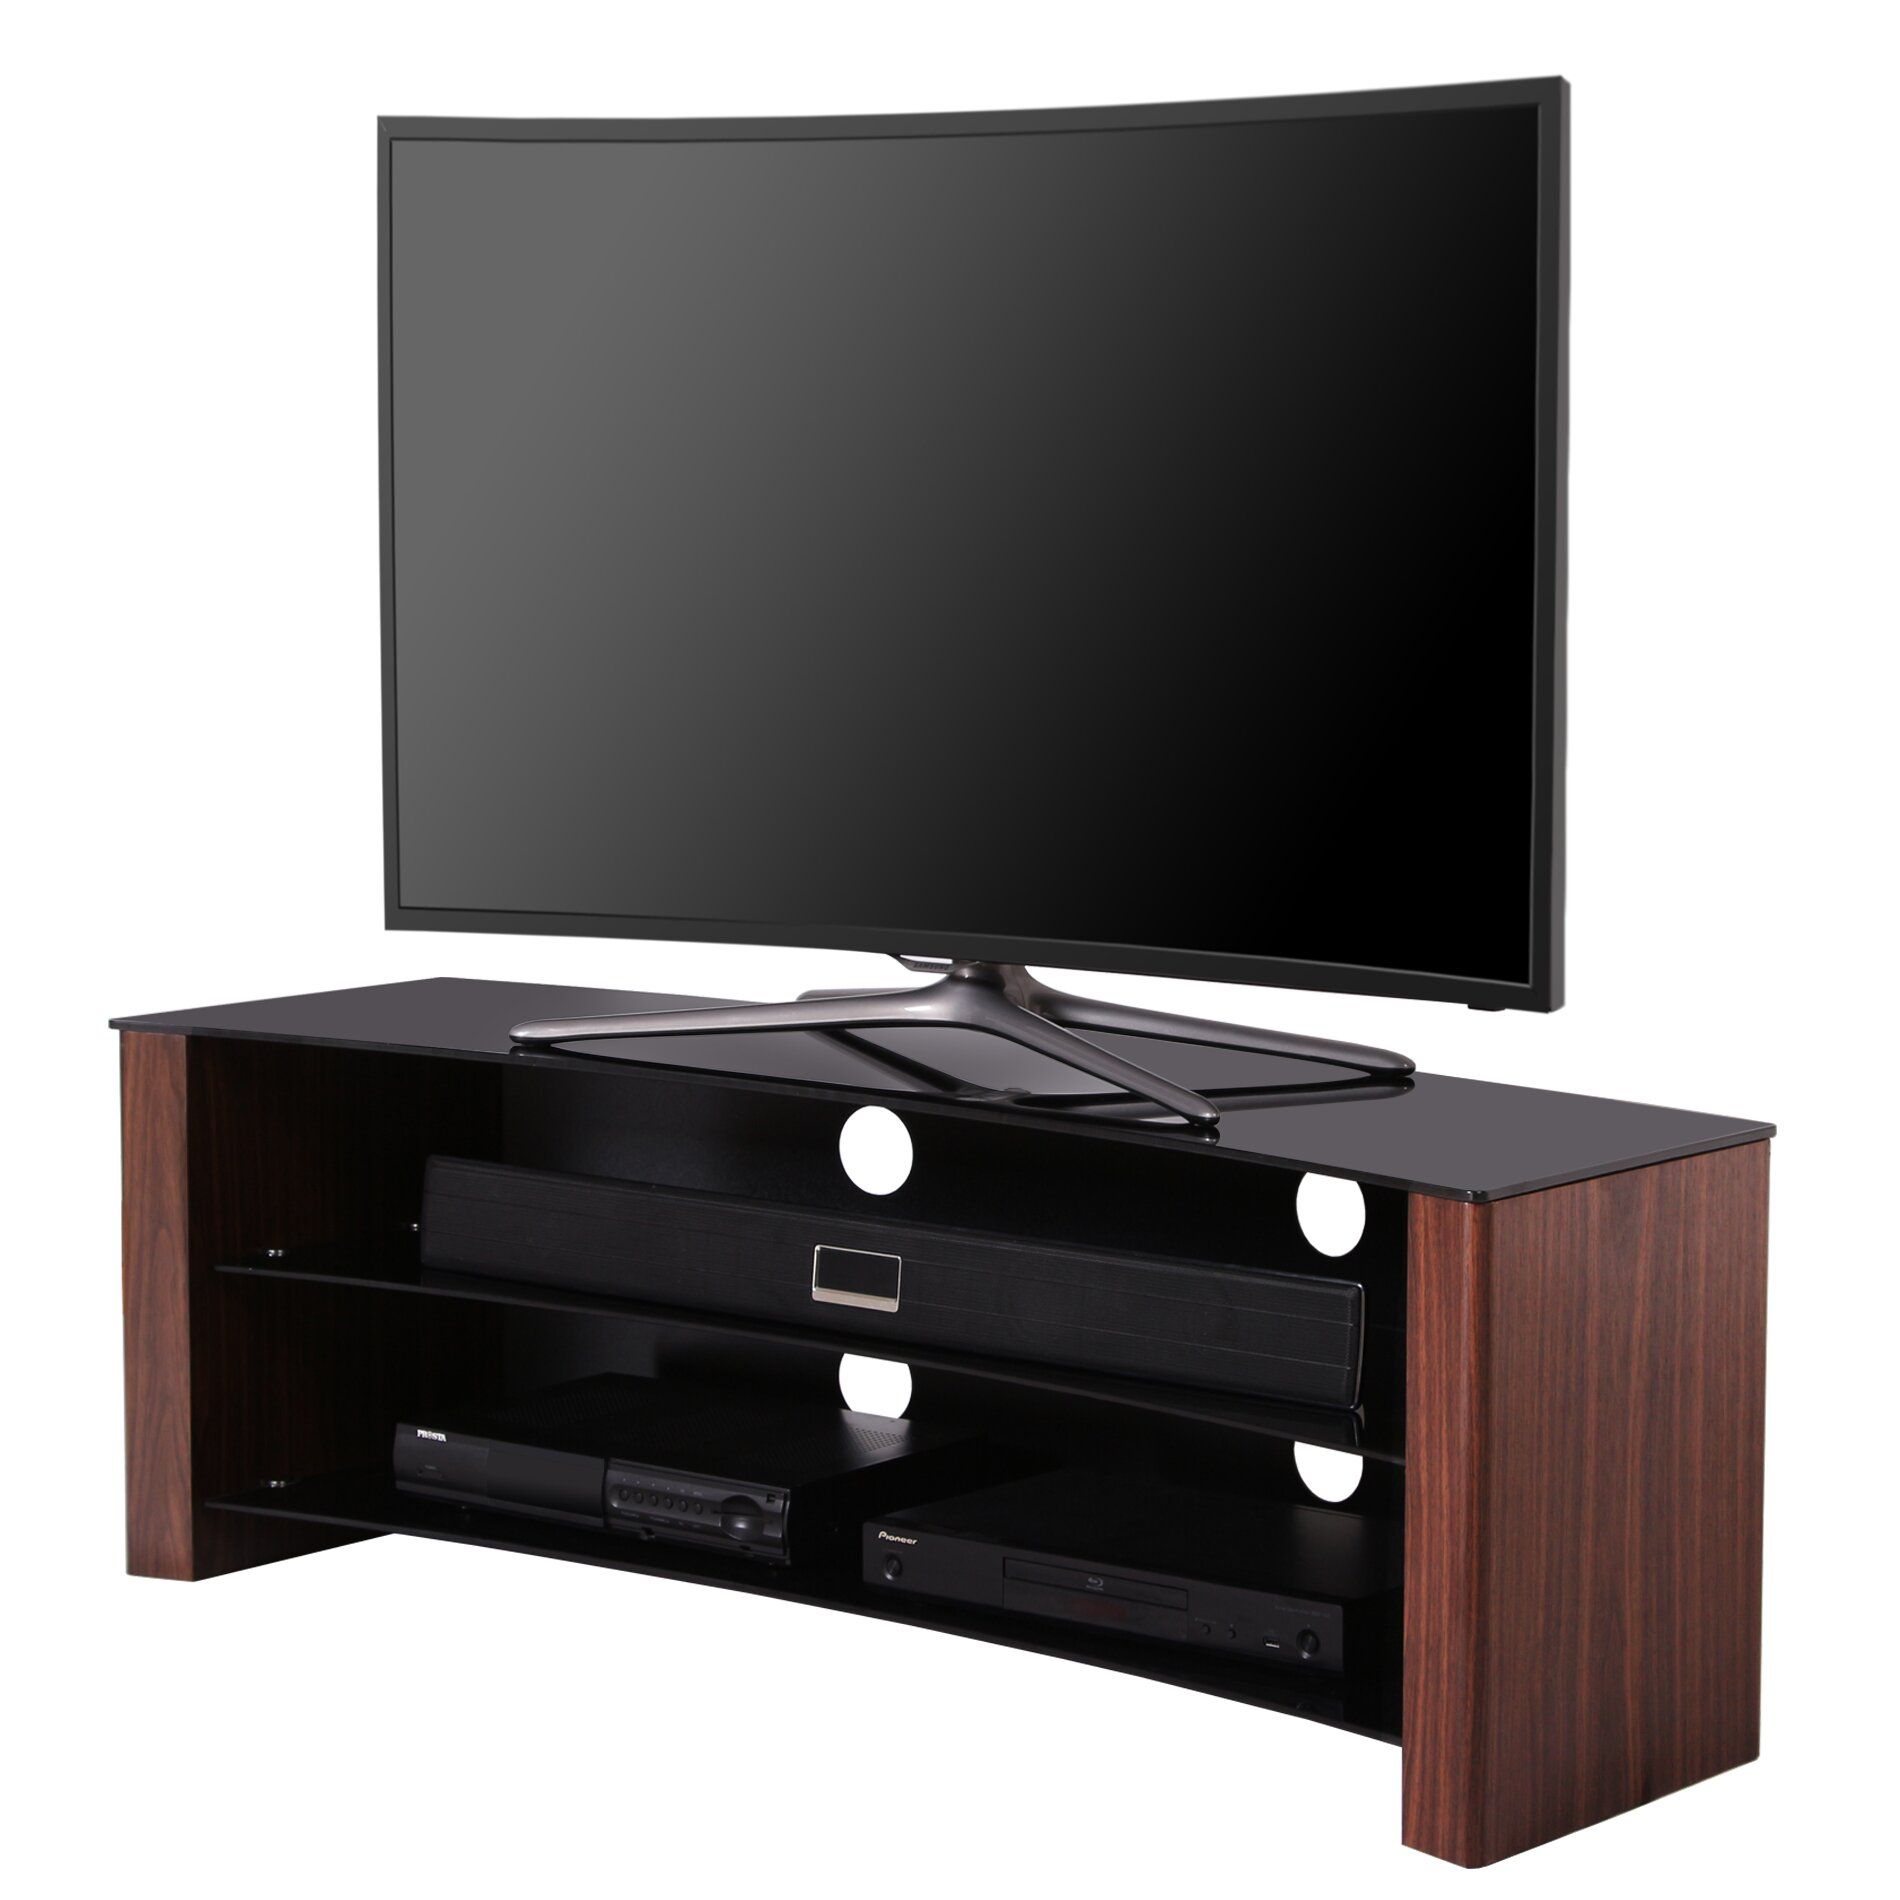 Hokku Designs Tv Stand For Tvs Up To 55" & Reviews In Tv Stands For 55 Inch Tv (View 12 of 15)